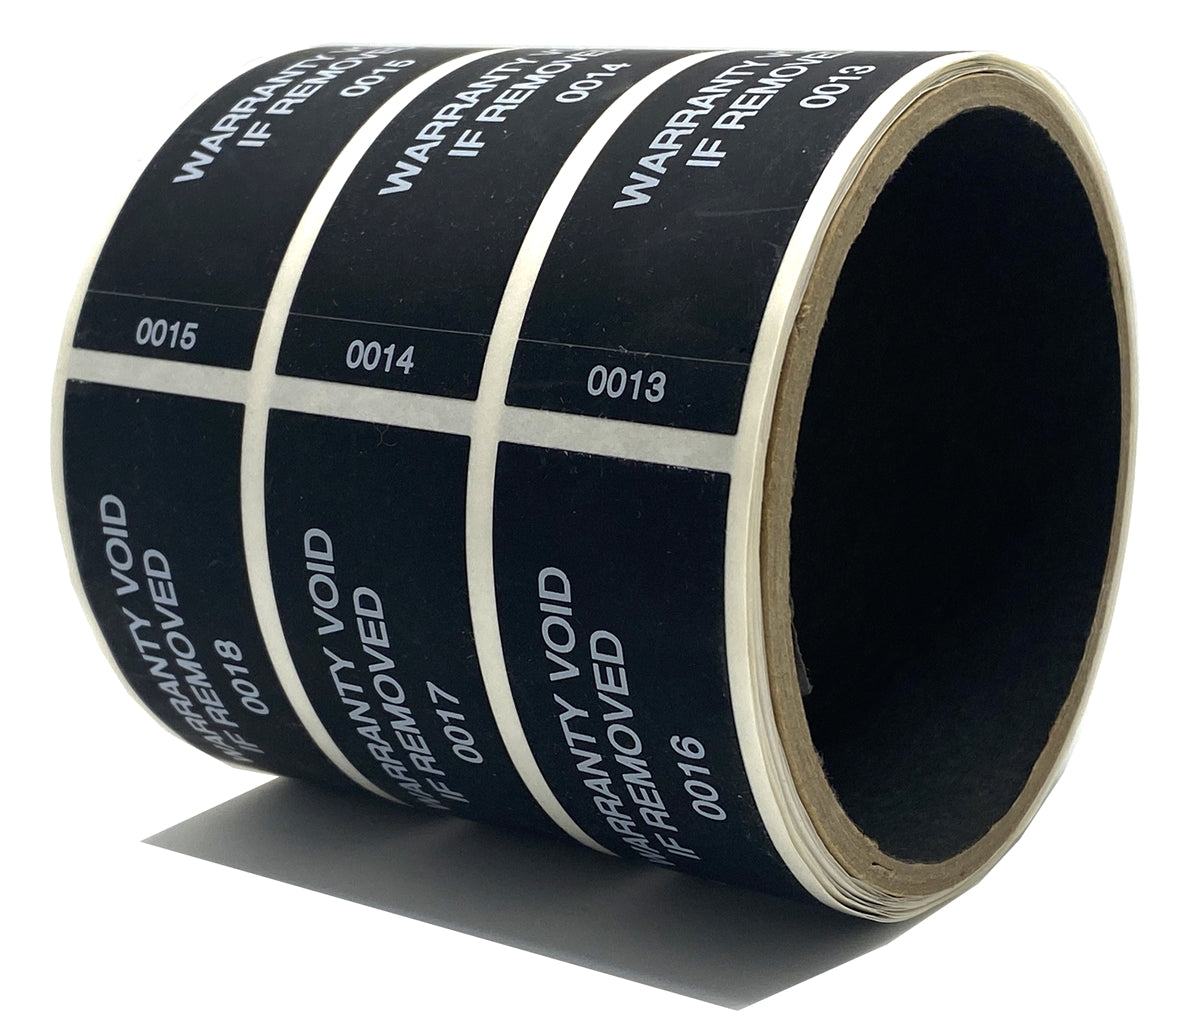 2,000 Tamper Evident Black Non Residue Security Labels TamperGuard® Seal Sticker, Rectangle 2.75" x 1" (70mm x 25mm). Printed: Warranty Void if Removed + Serialized